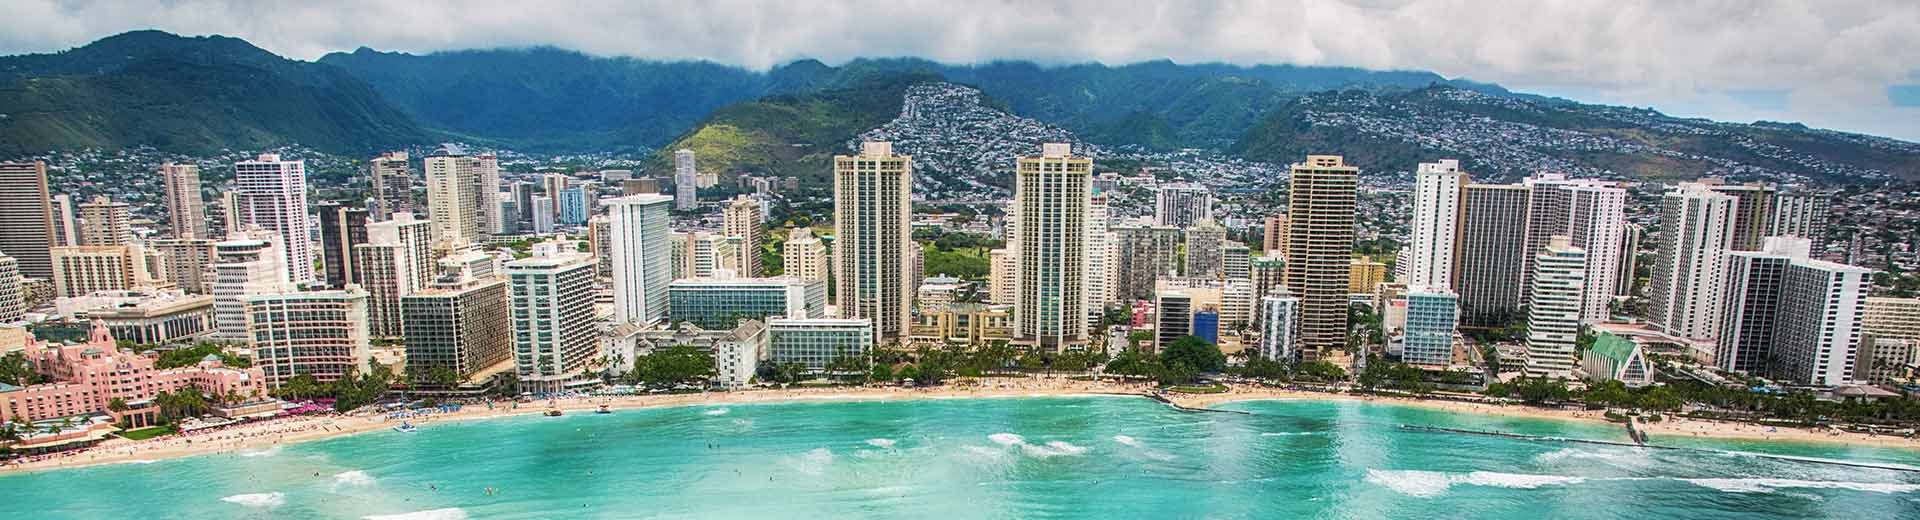 The tall hotels of Waikiki look over the turqoise waters and pristine, white beaches.